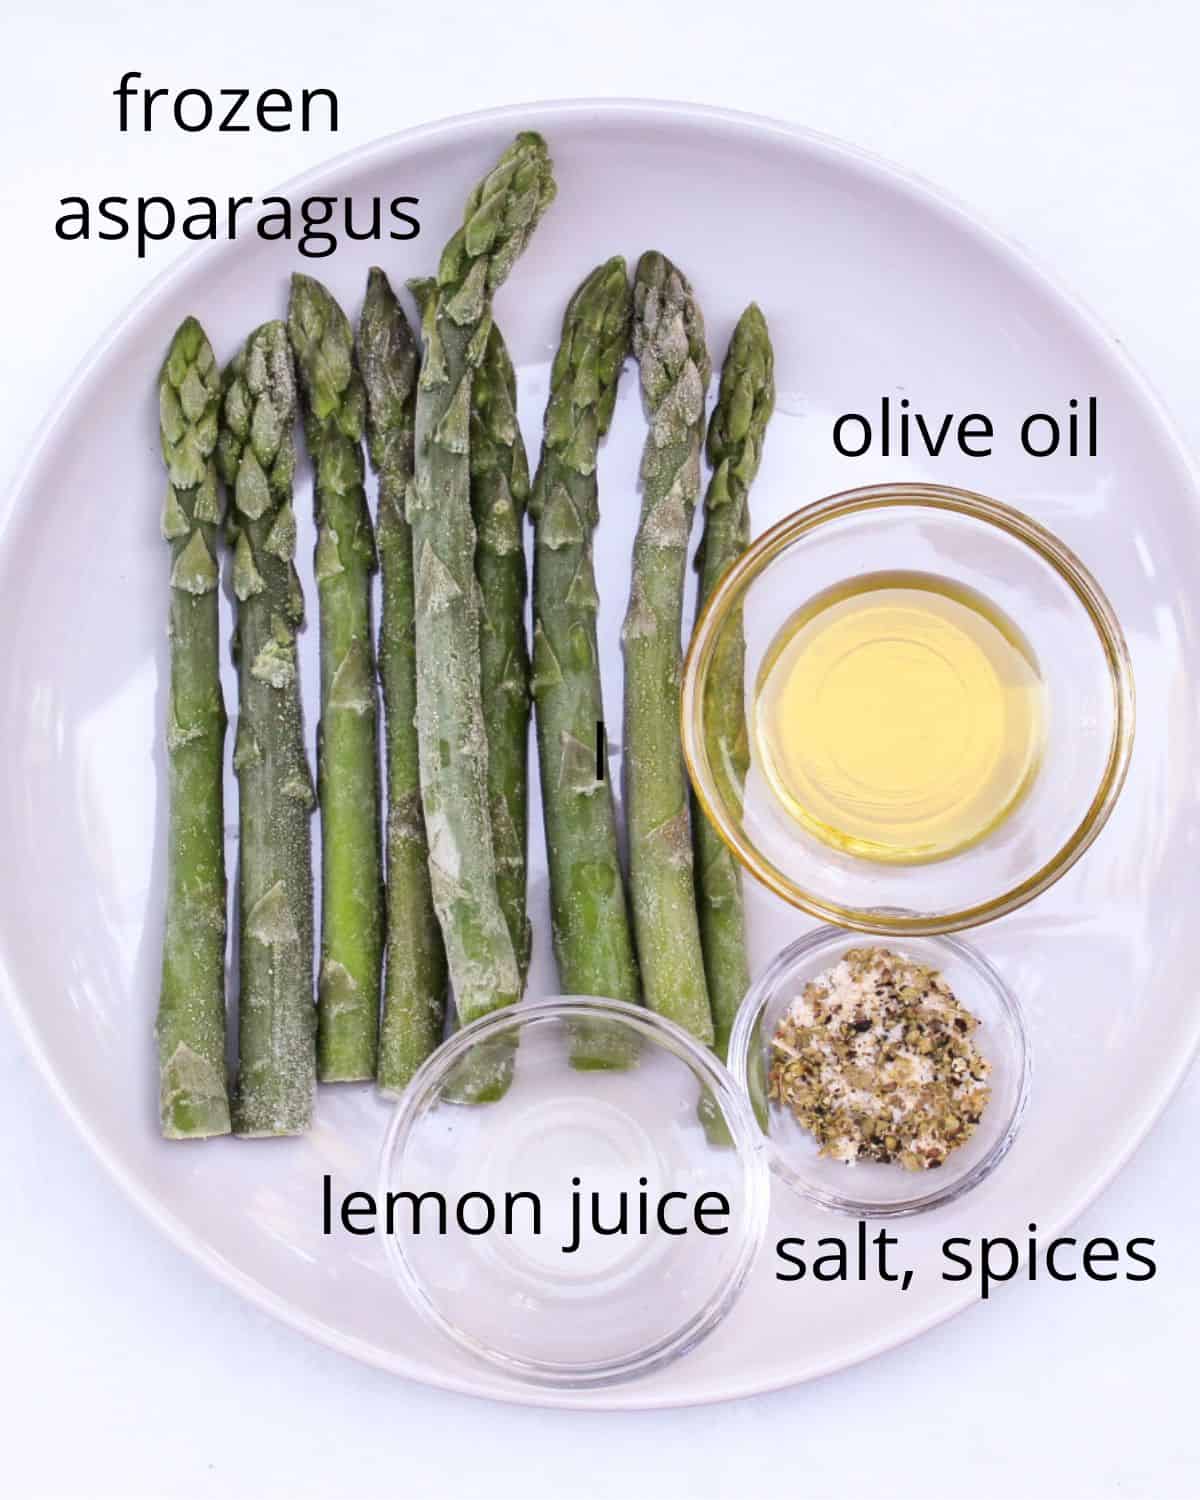 Overhead view of a plate with labeled recipe ingredients.